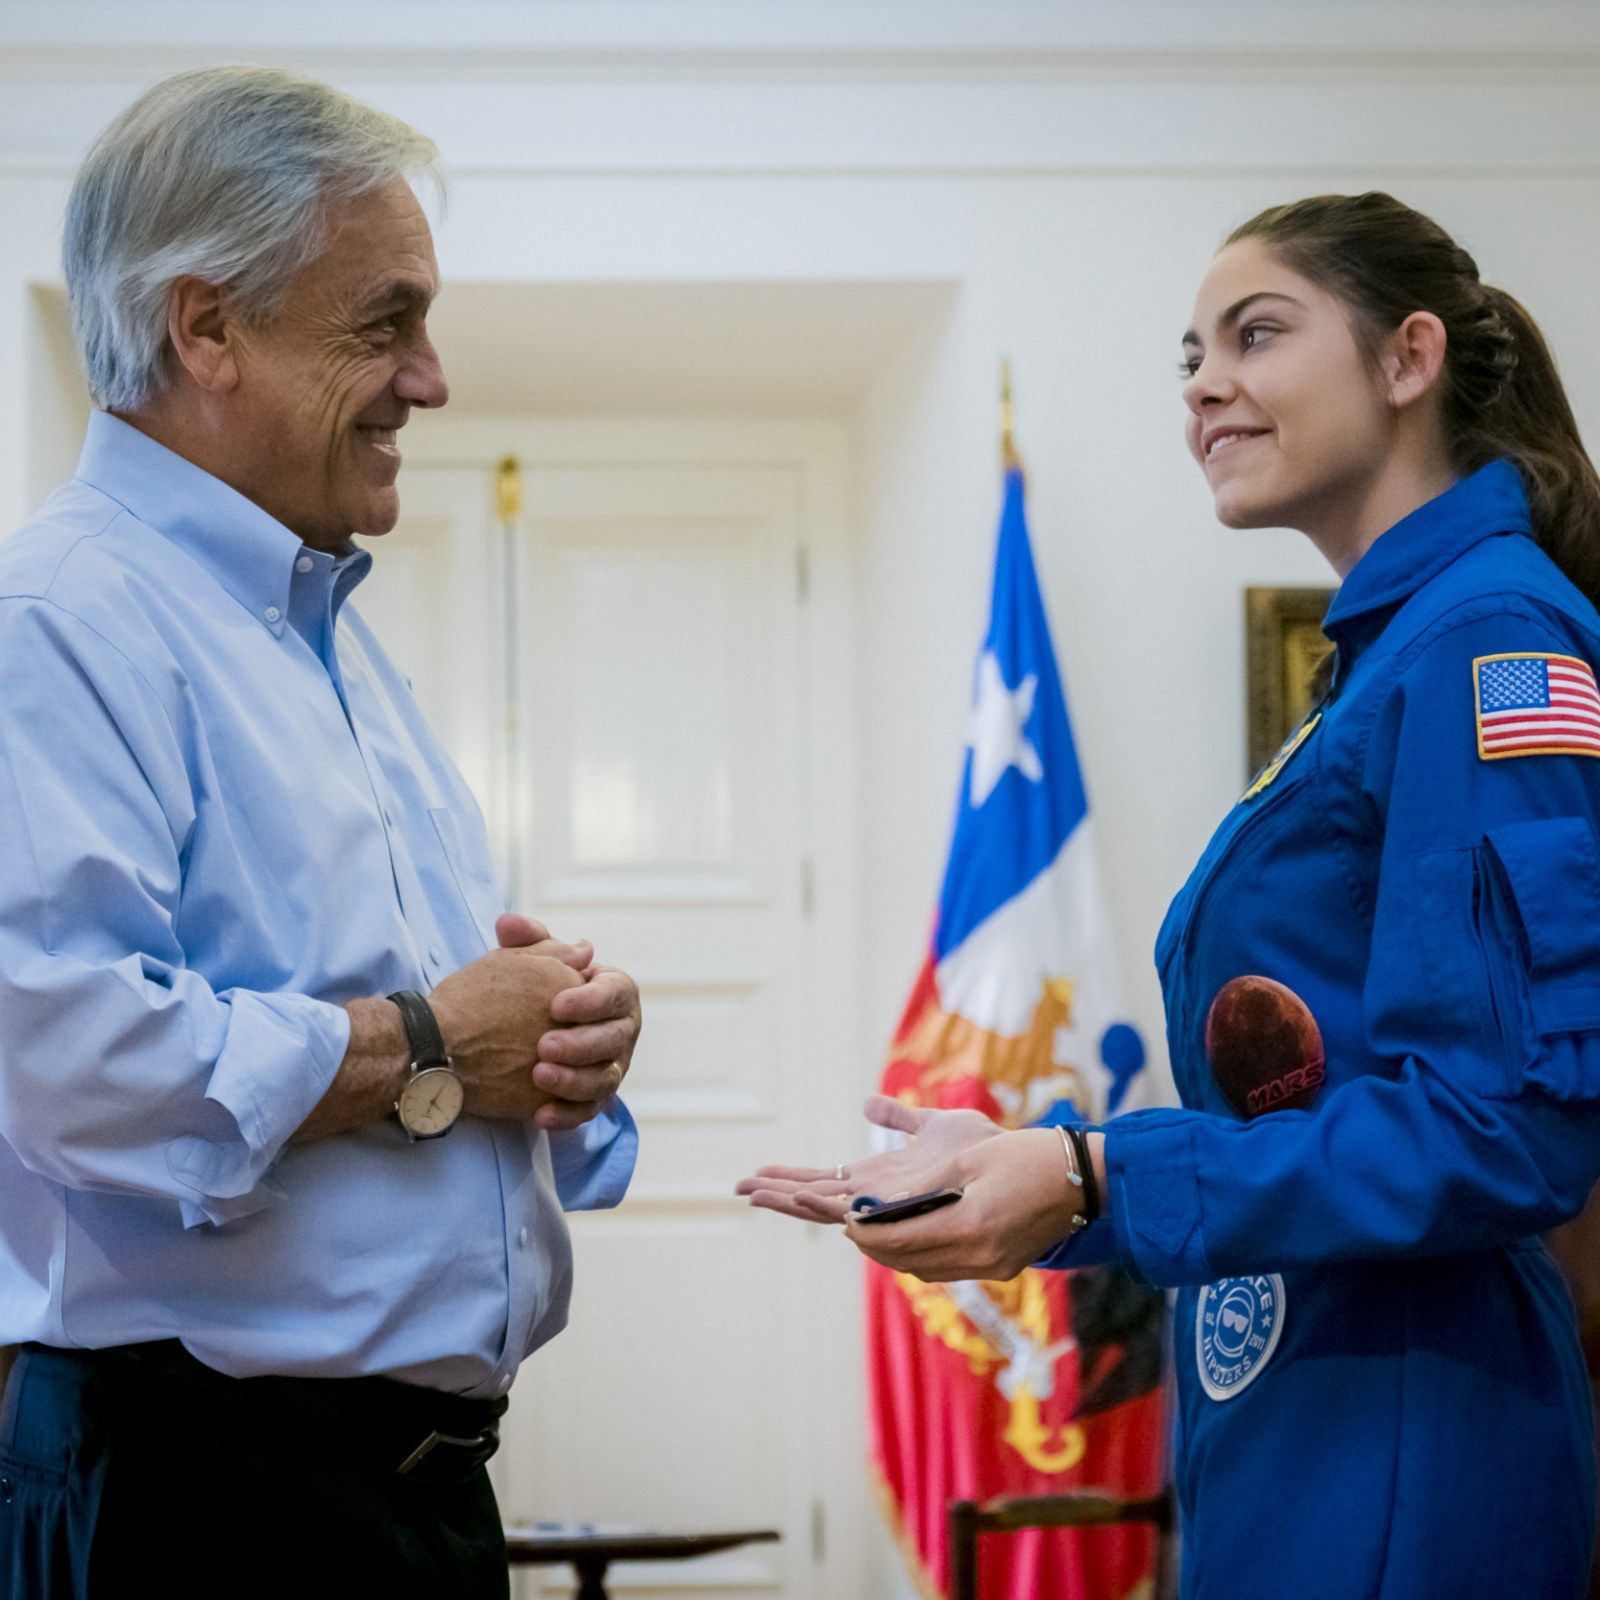 Alyssa Carson: 18 Year Old Astronaut In Training Would 'Consider' Permanently Relocating To Mars